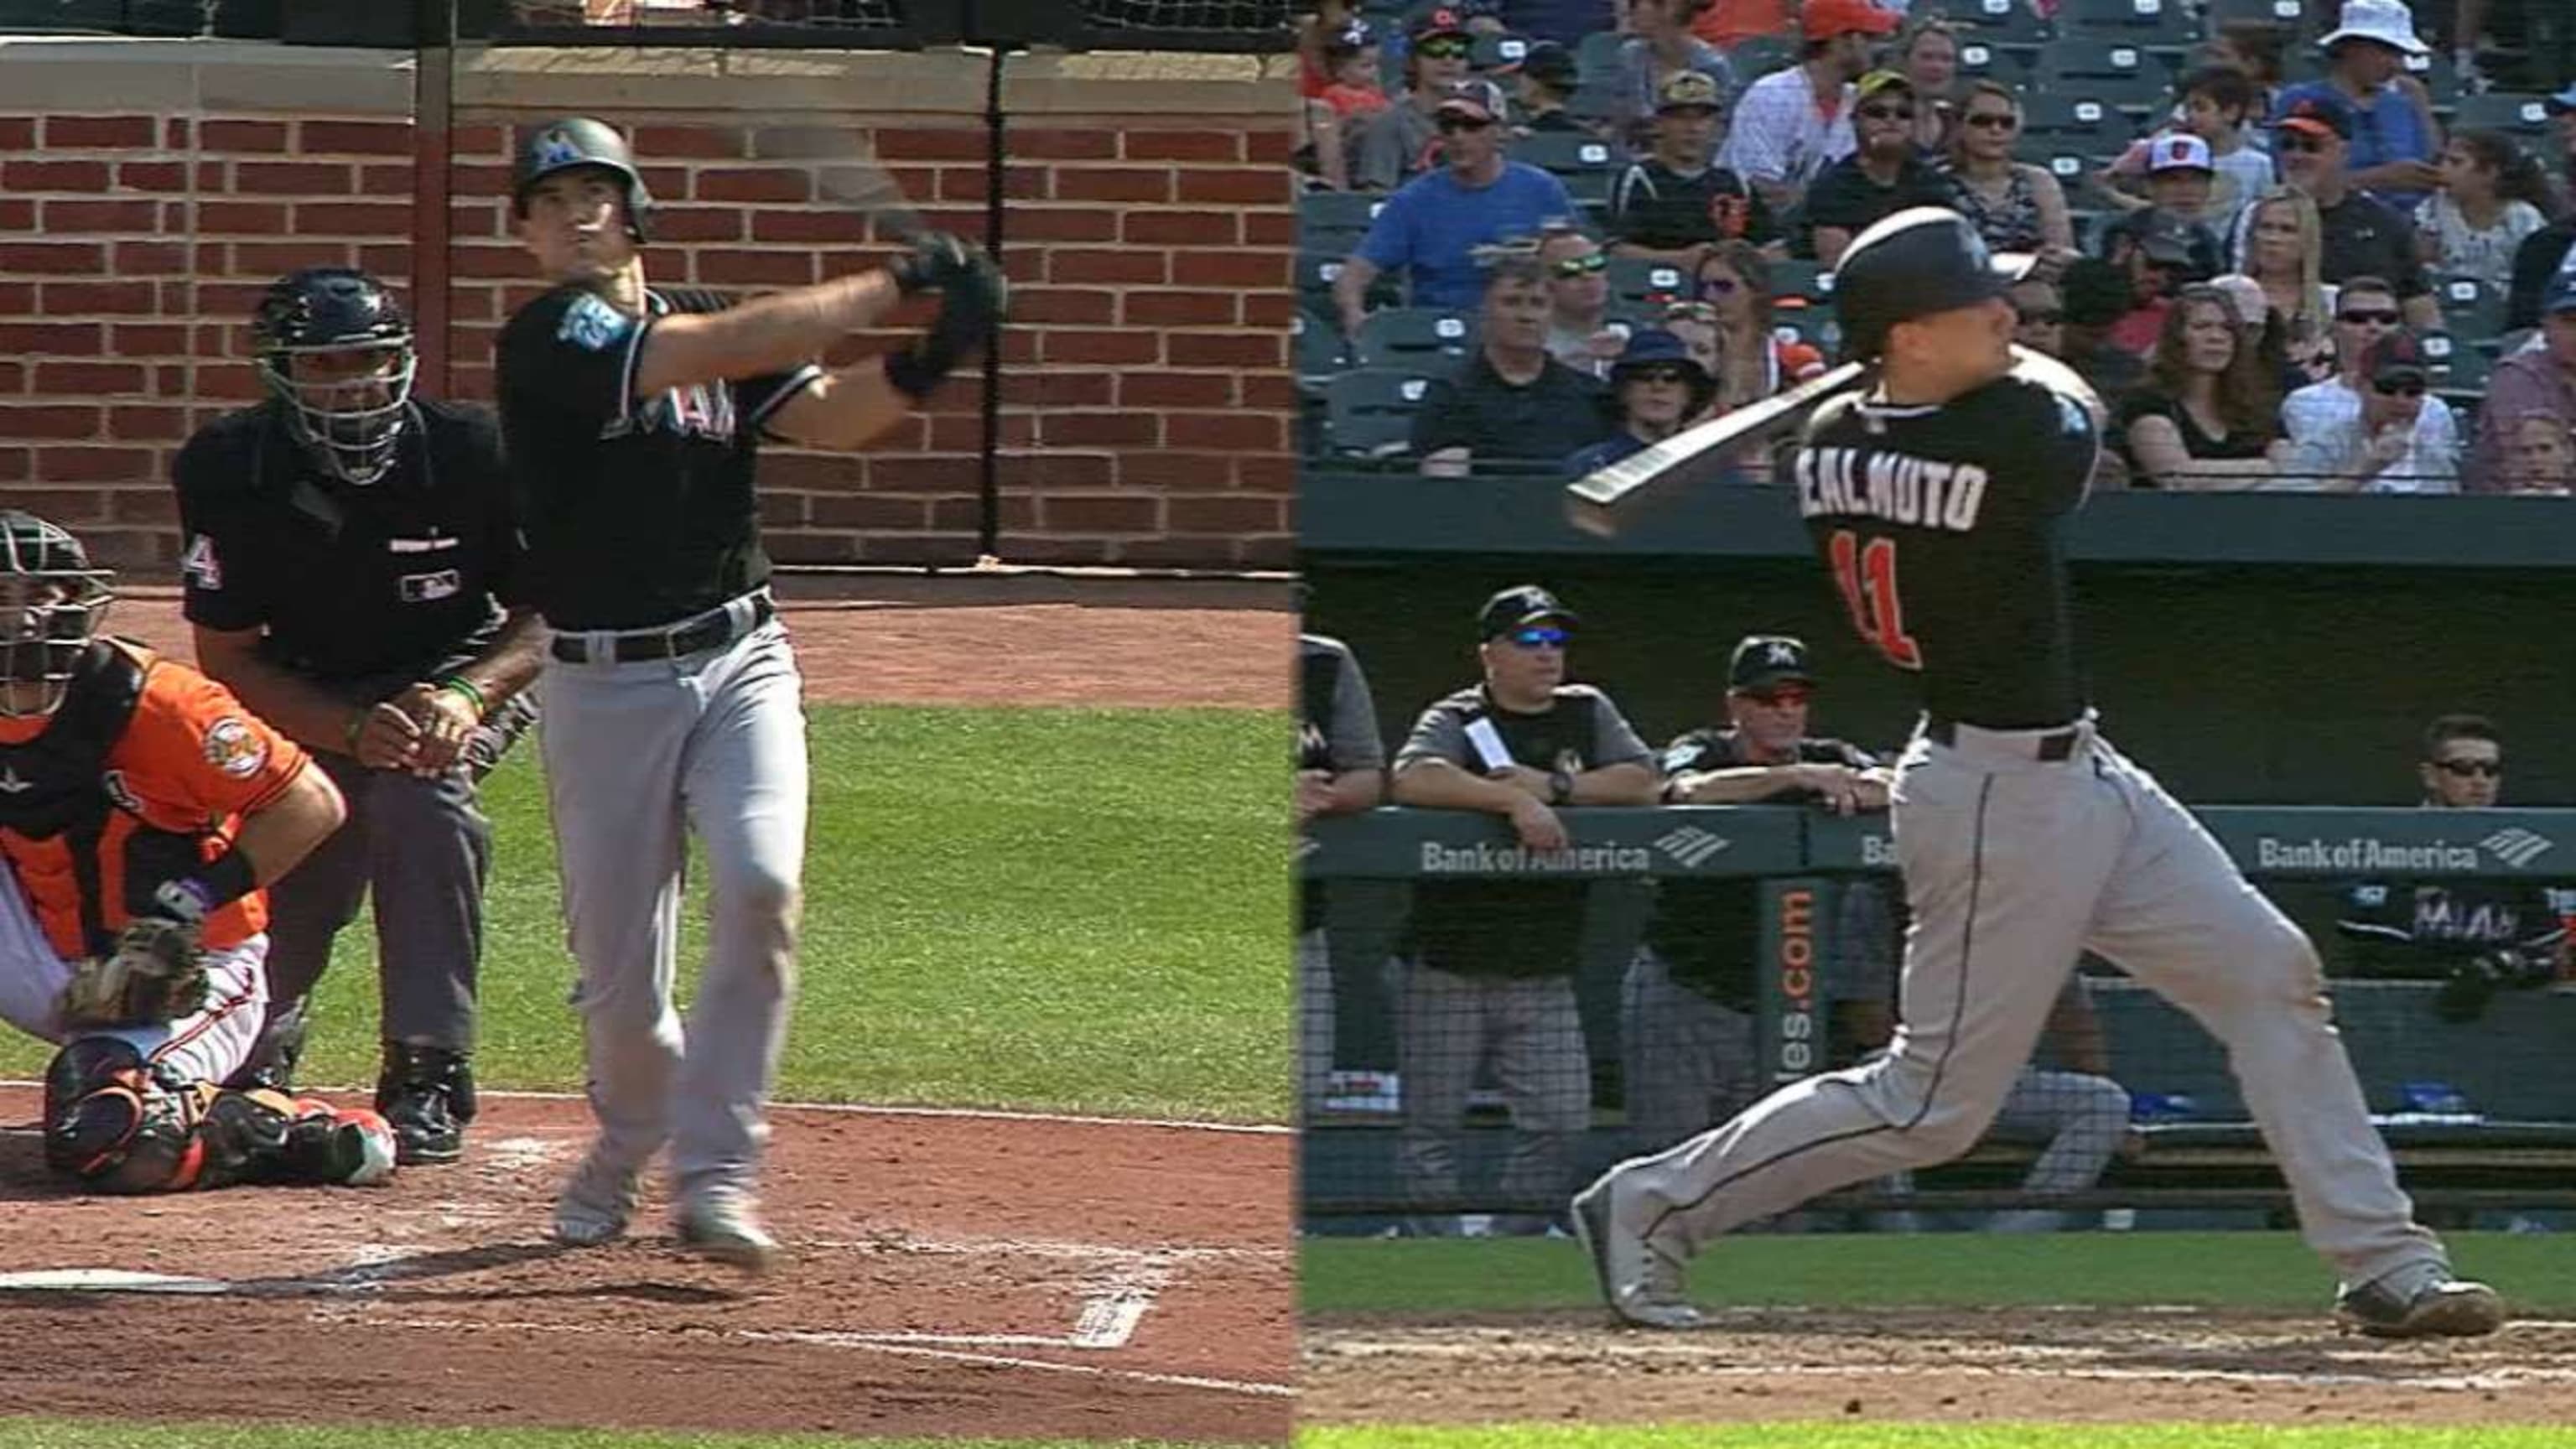 Alfaro and Cervelli could be Marlins' Best Catching Combo in Years